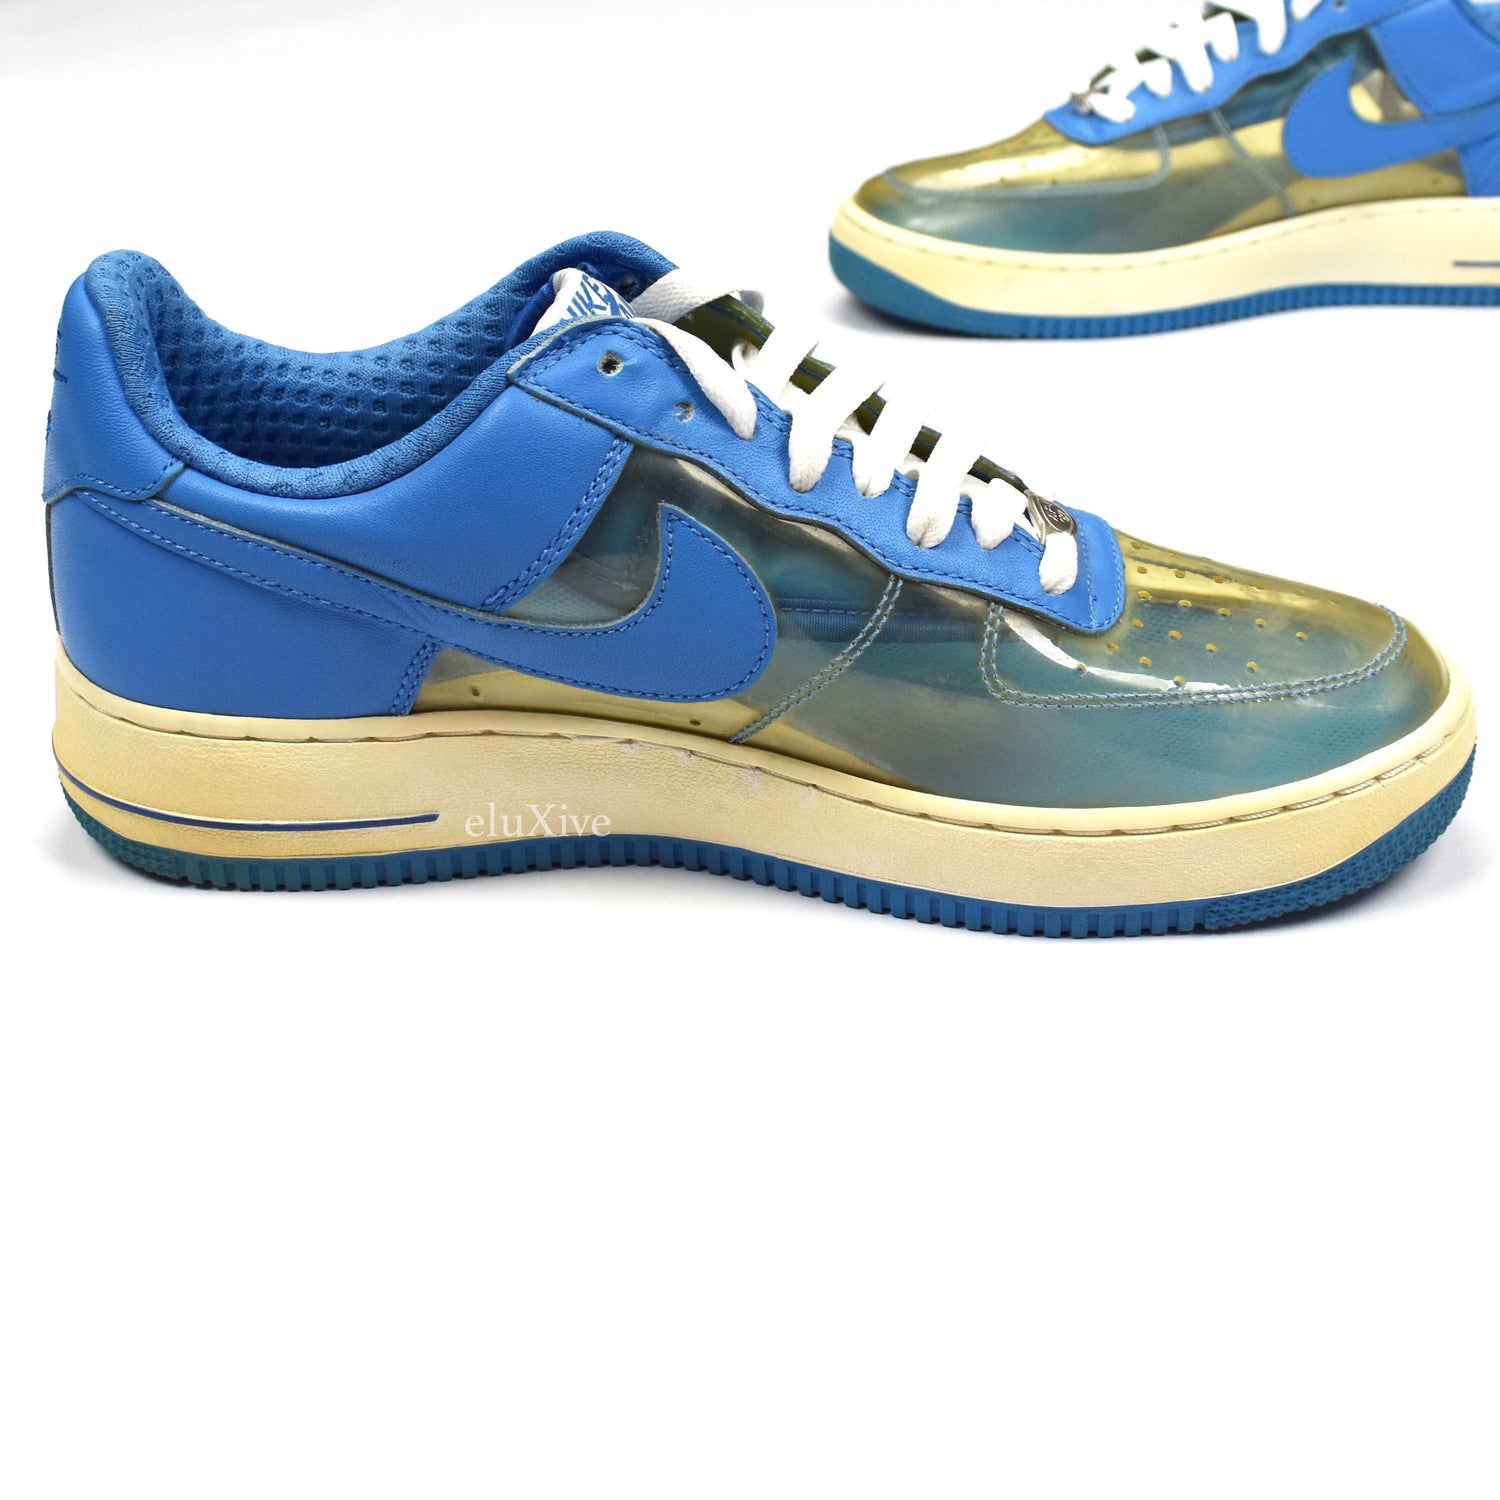 Size 11 - Nike Air Force 1 Premium Fantastic 4 Invisible Woman for